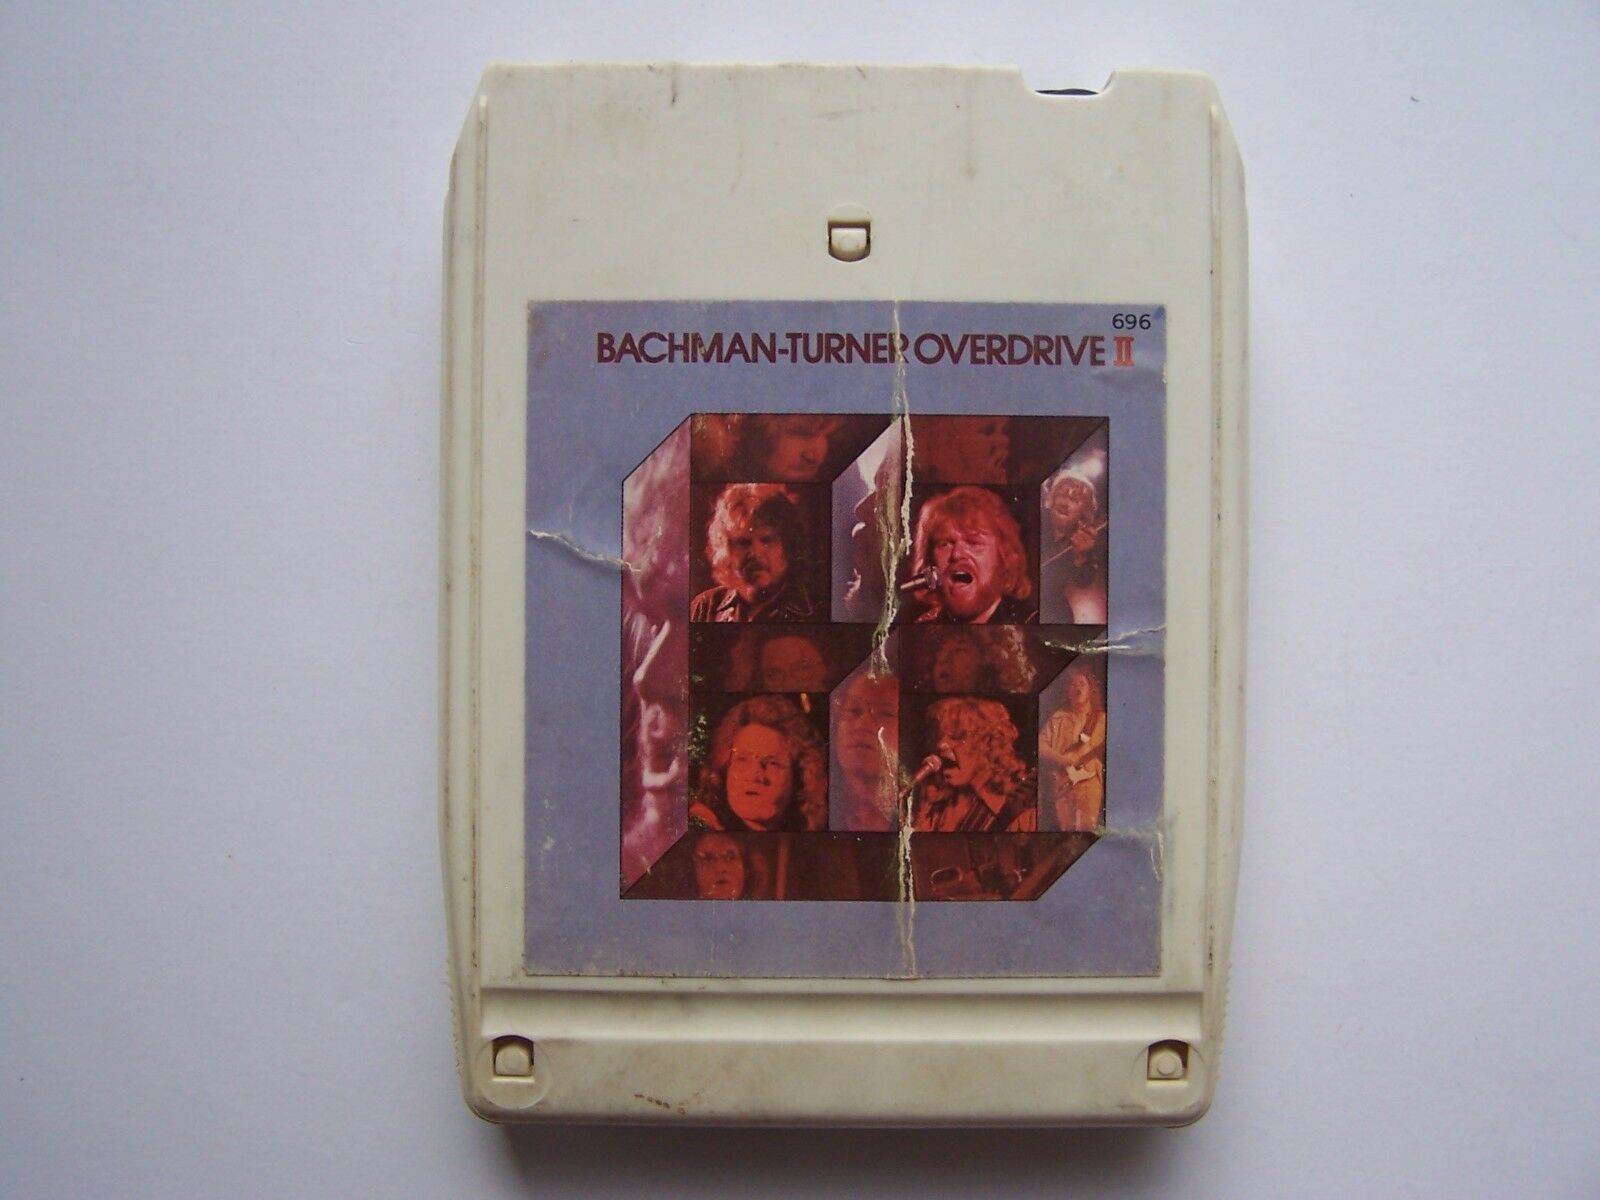 Primary image for Bachman-Turner Overdrive – Bachman-Turner Overdrive II 8 Track Tape MC8-1-696